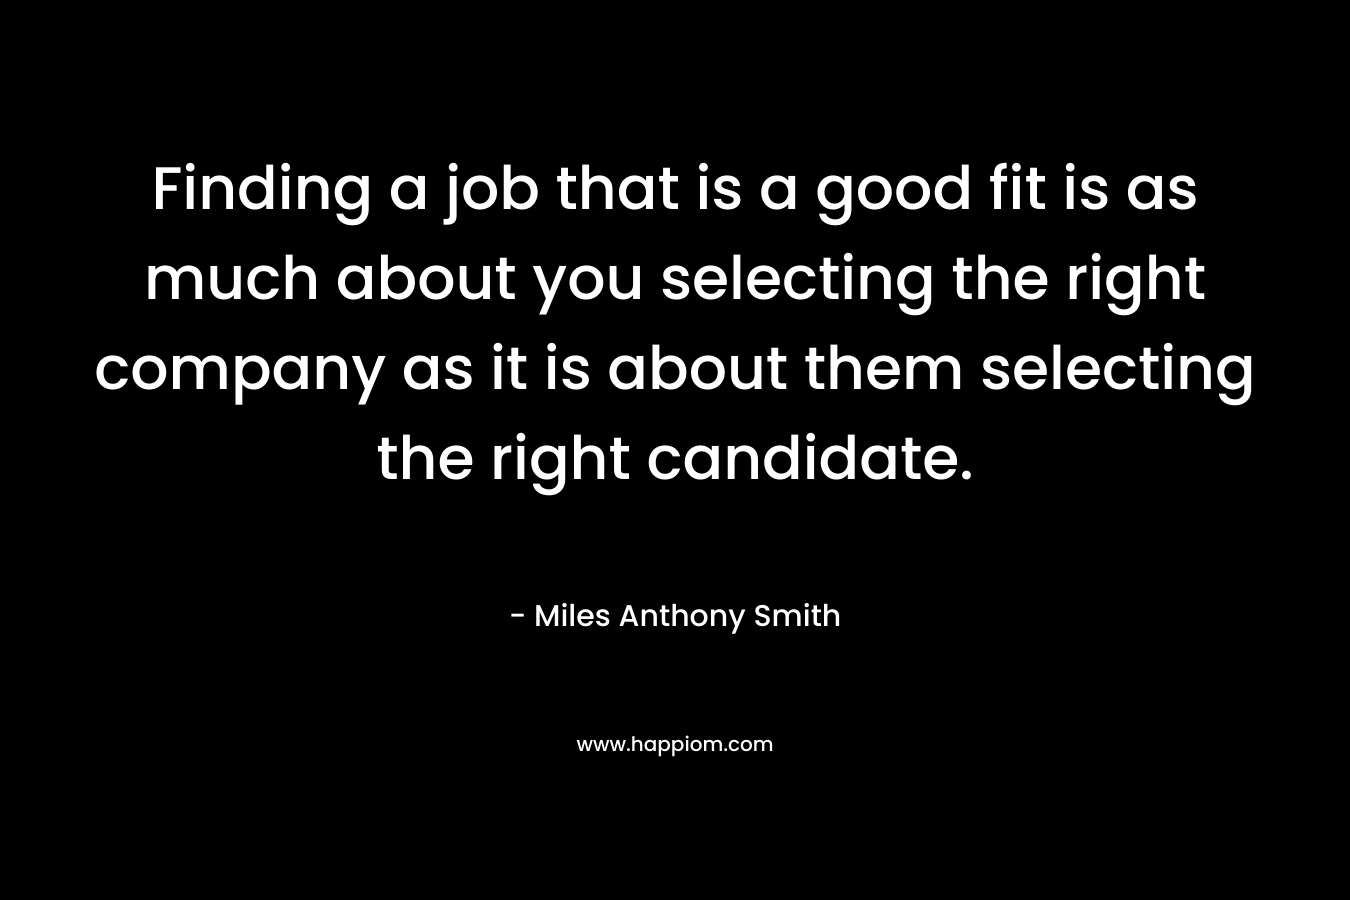 Finding a job that is a good fit is as much about you selecting the right company as it is about them selecting the right candidate. – Miles Anthony Smith